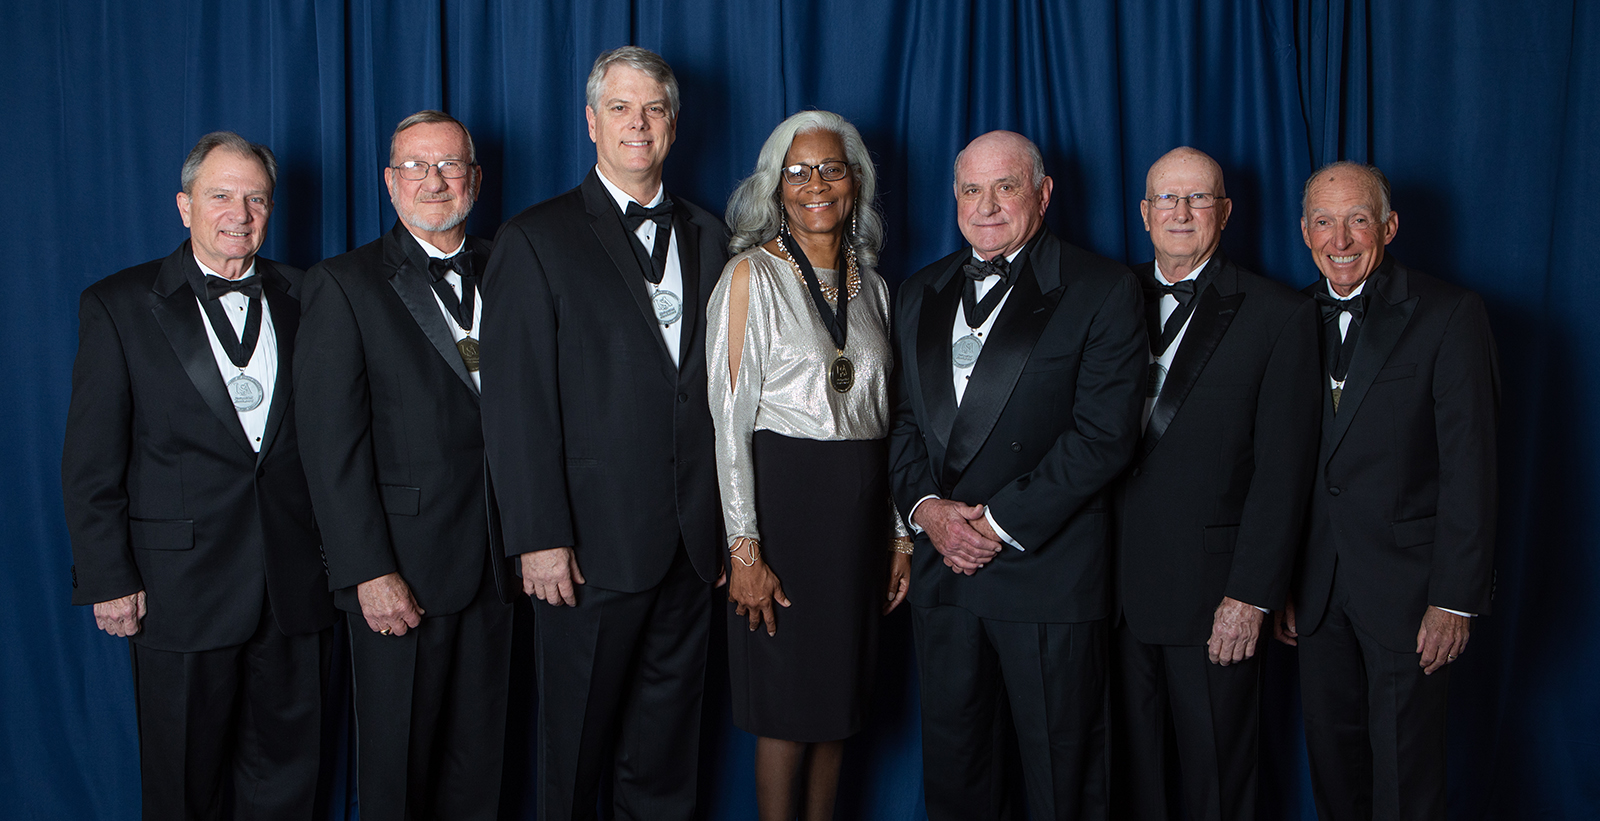 The USA National Alumni Association honored alumni and supporters at the 16th annual Distinguished Alumni & Service Awards. Those recognized were, from left, William J. “Happy” Fulford III, Dr. Joseph F. Busta Jr., Brian J. Cuccias, Merceria Ludgood, John T. Crowder Jr., William B. Burnsed Jr. and James J. “Jake” Gosa.  data-lightbox='featured'